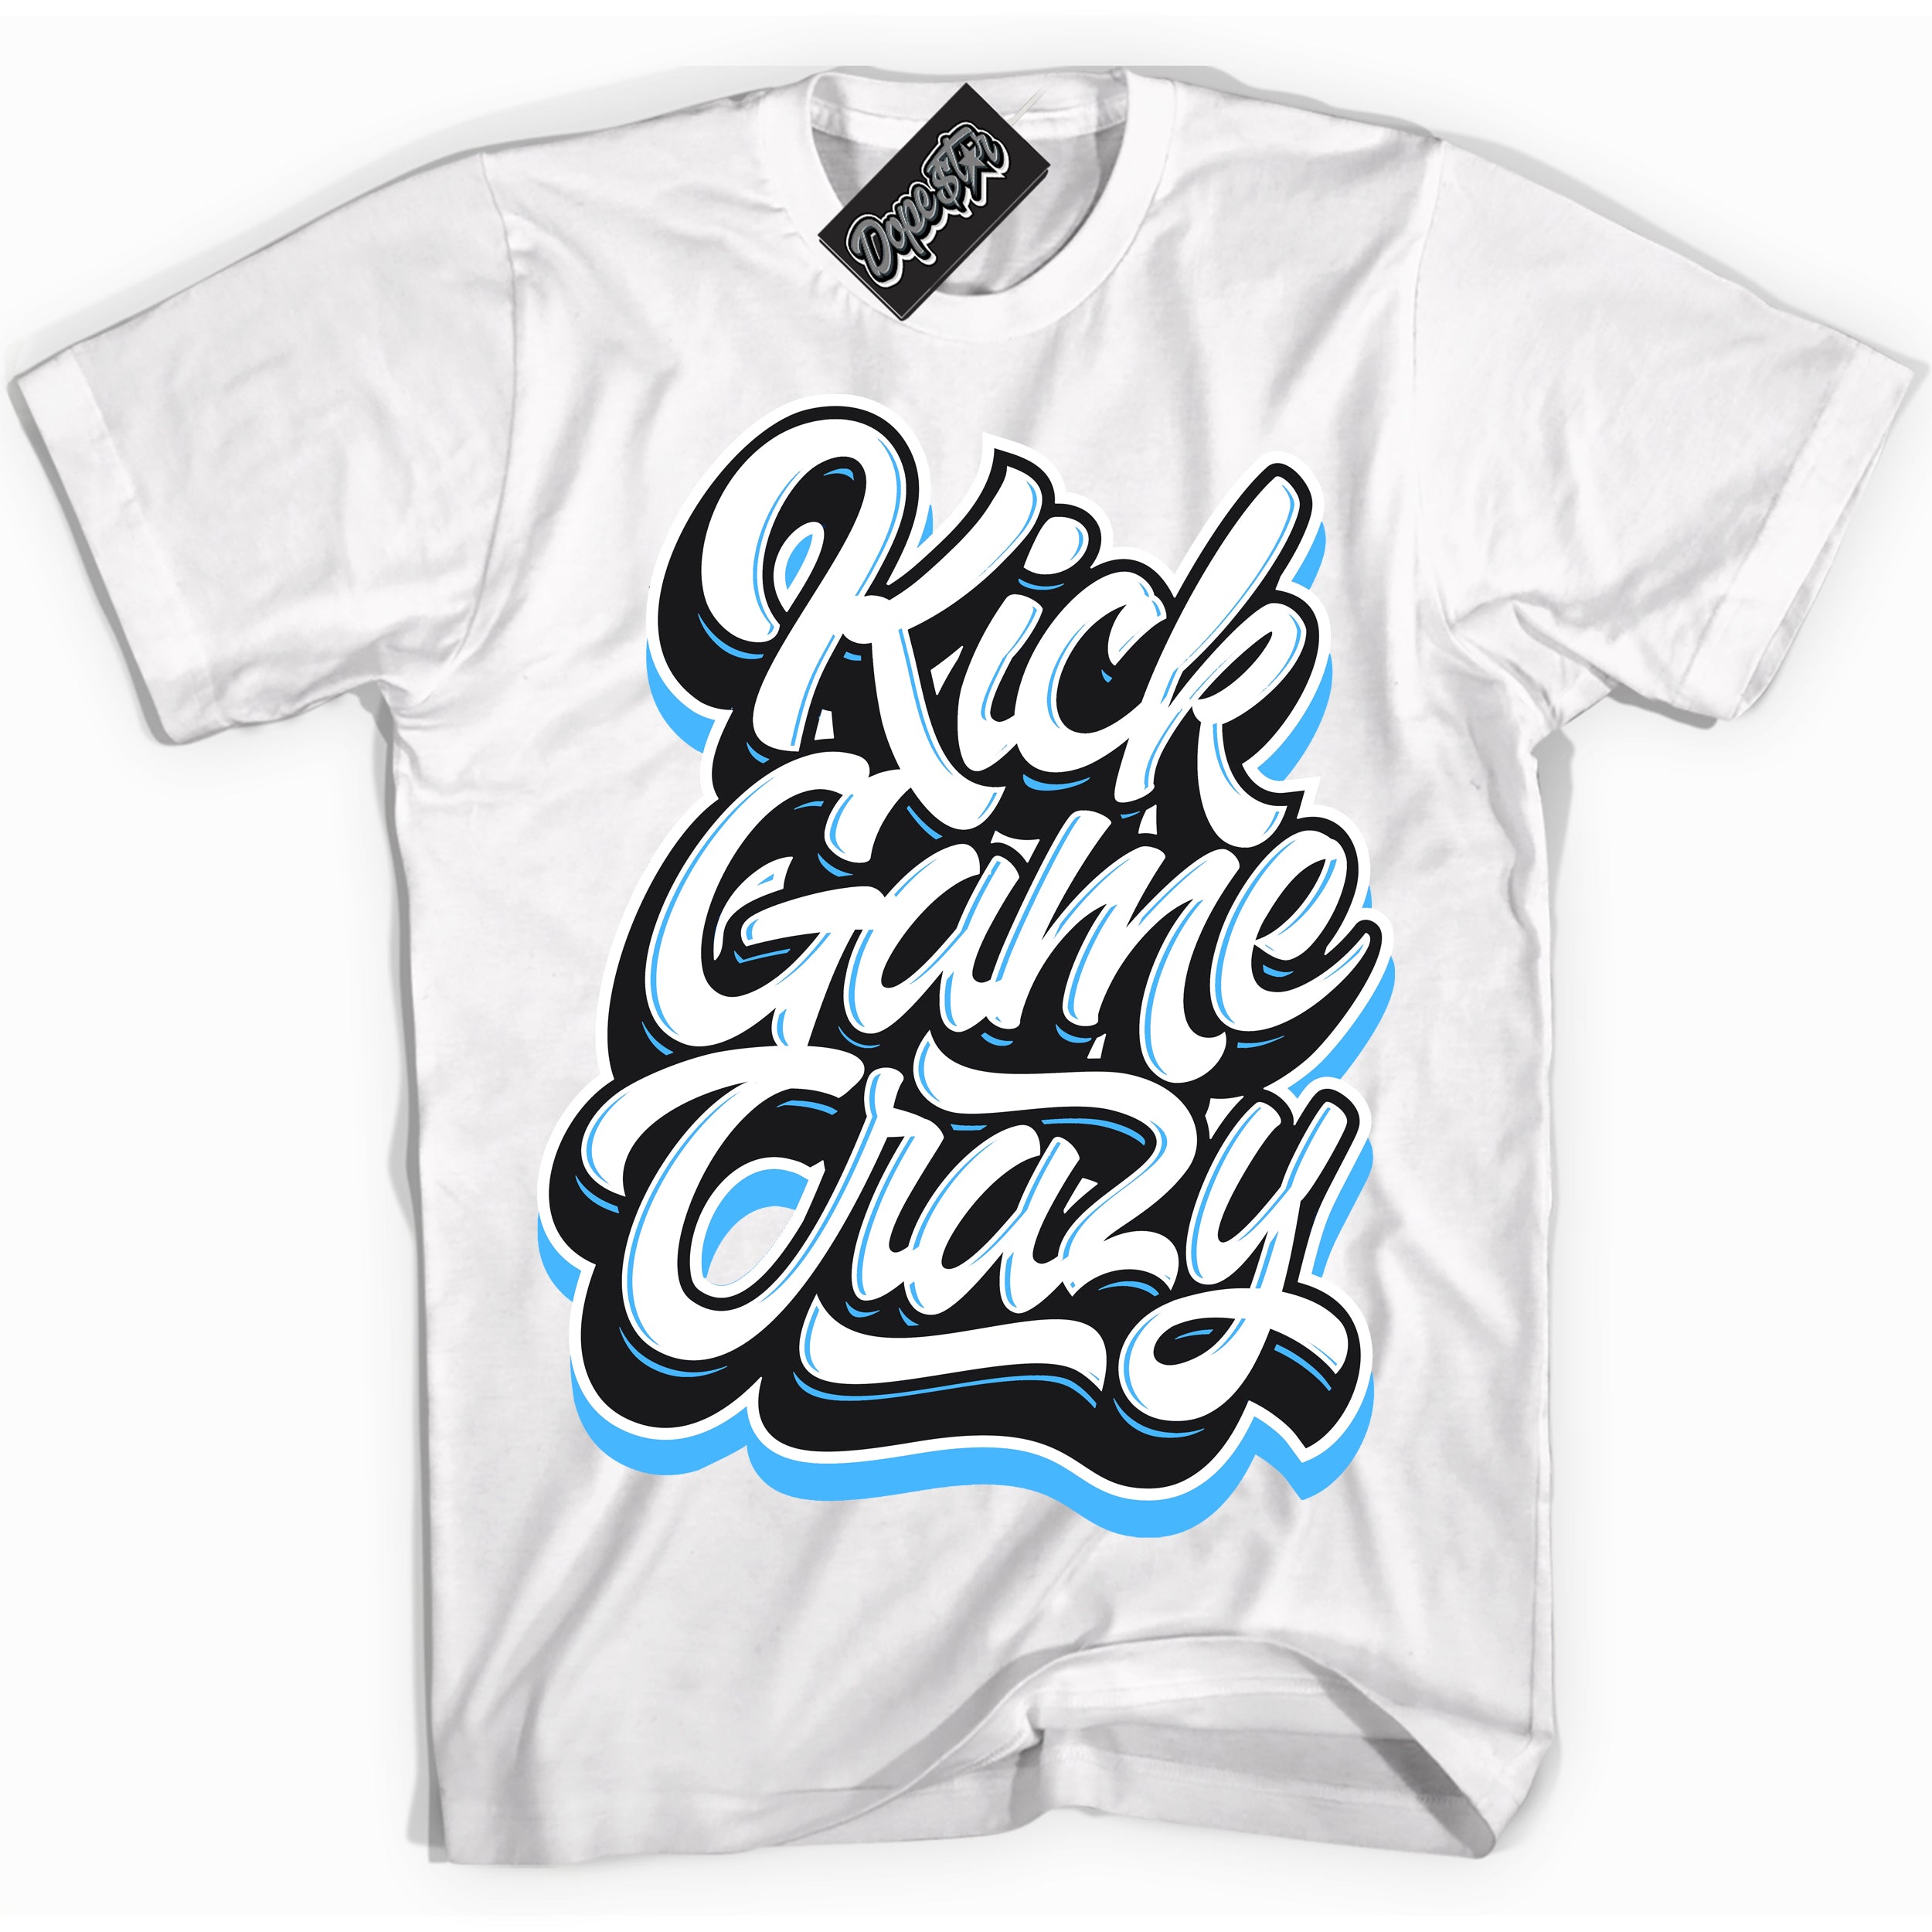 Cool White graphic tee with “ Kick Game Crazy ” design, that perfectly matches Powder Blue 9s sneakers 